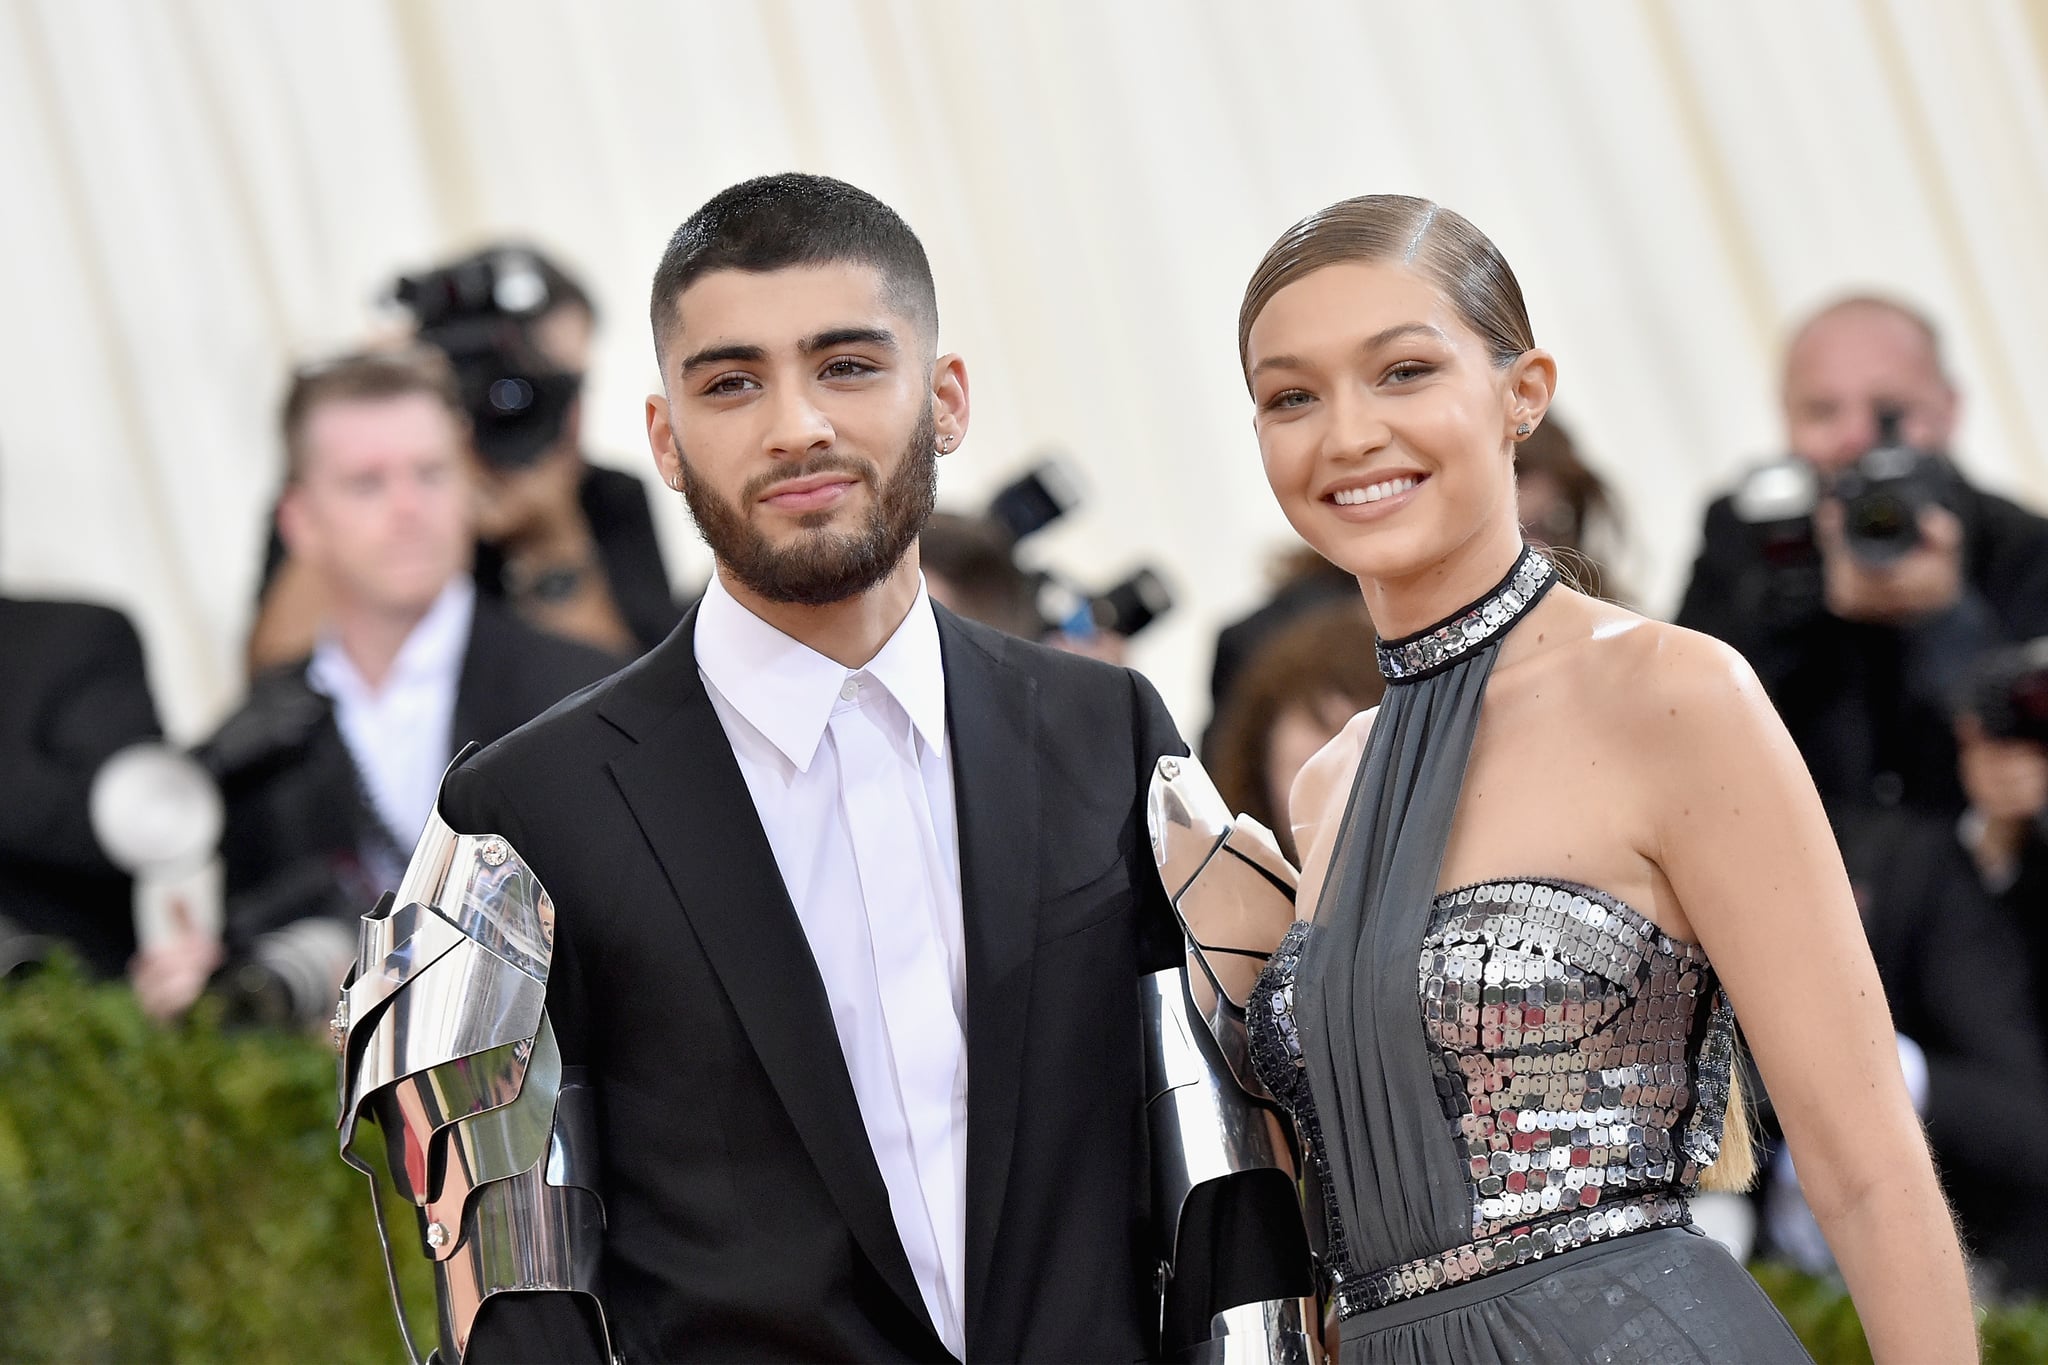 Gigi Hadid has given birth to their first child.